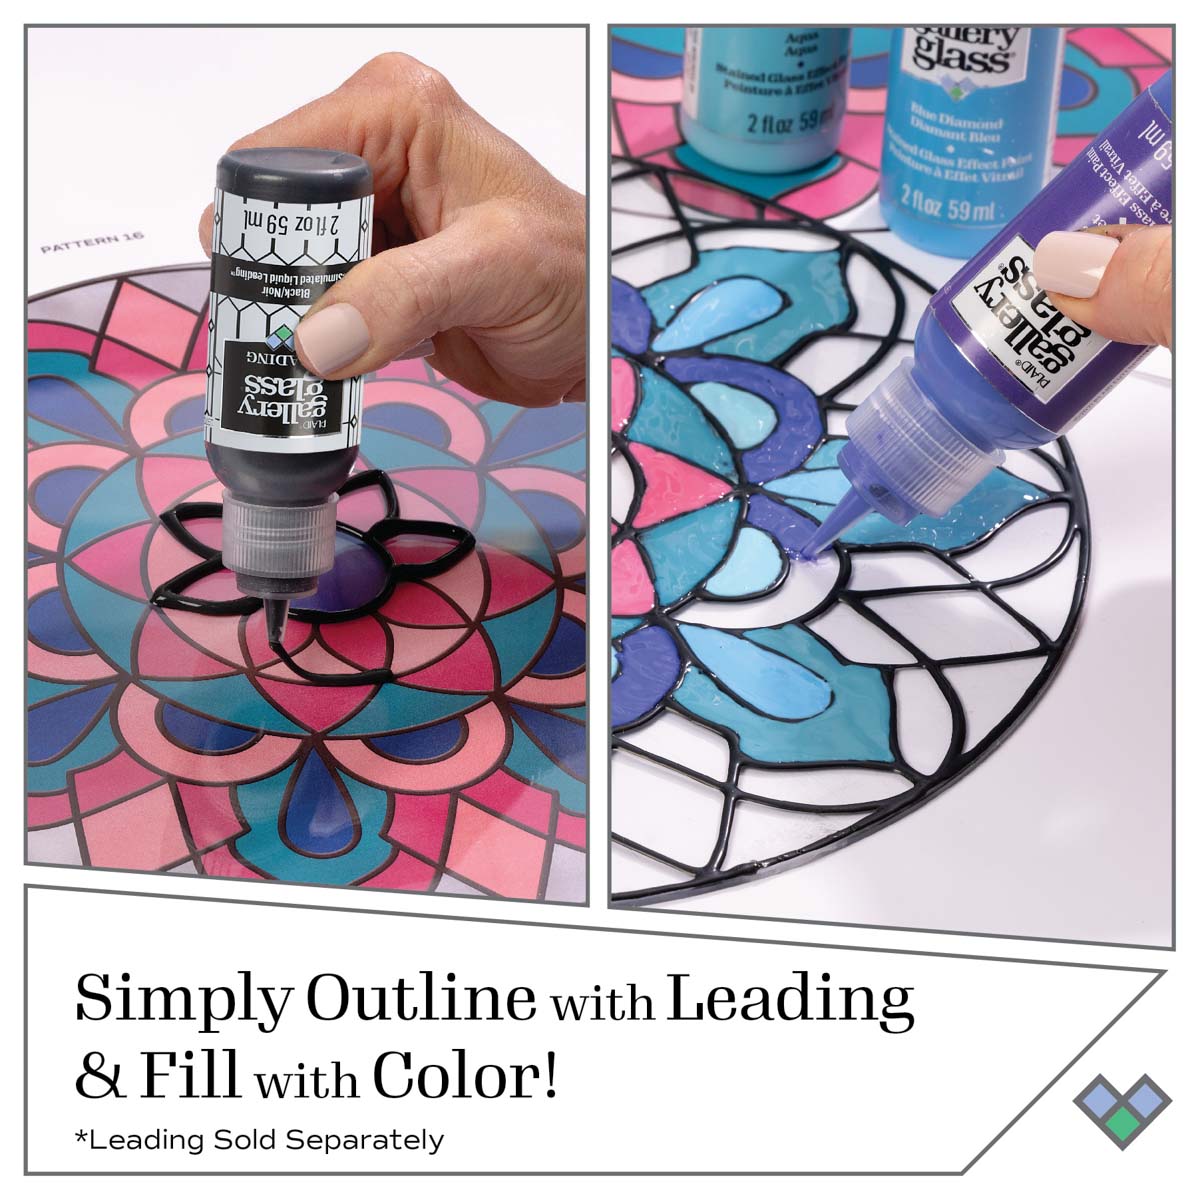 Gallery Glass ® Stained Glass Effect Paint - Black Onyx, 2 oz. - 19775